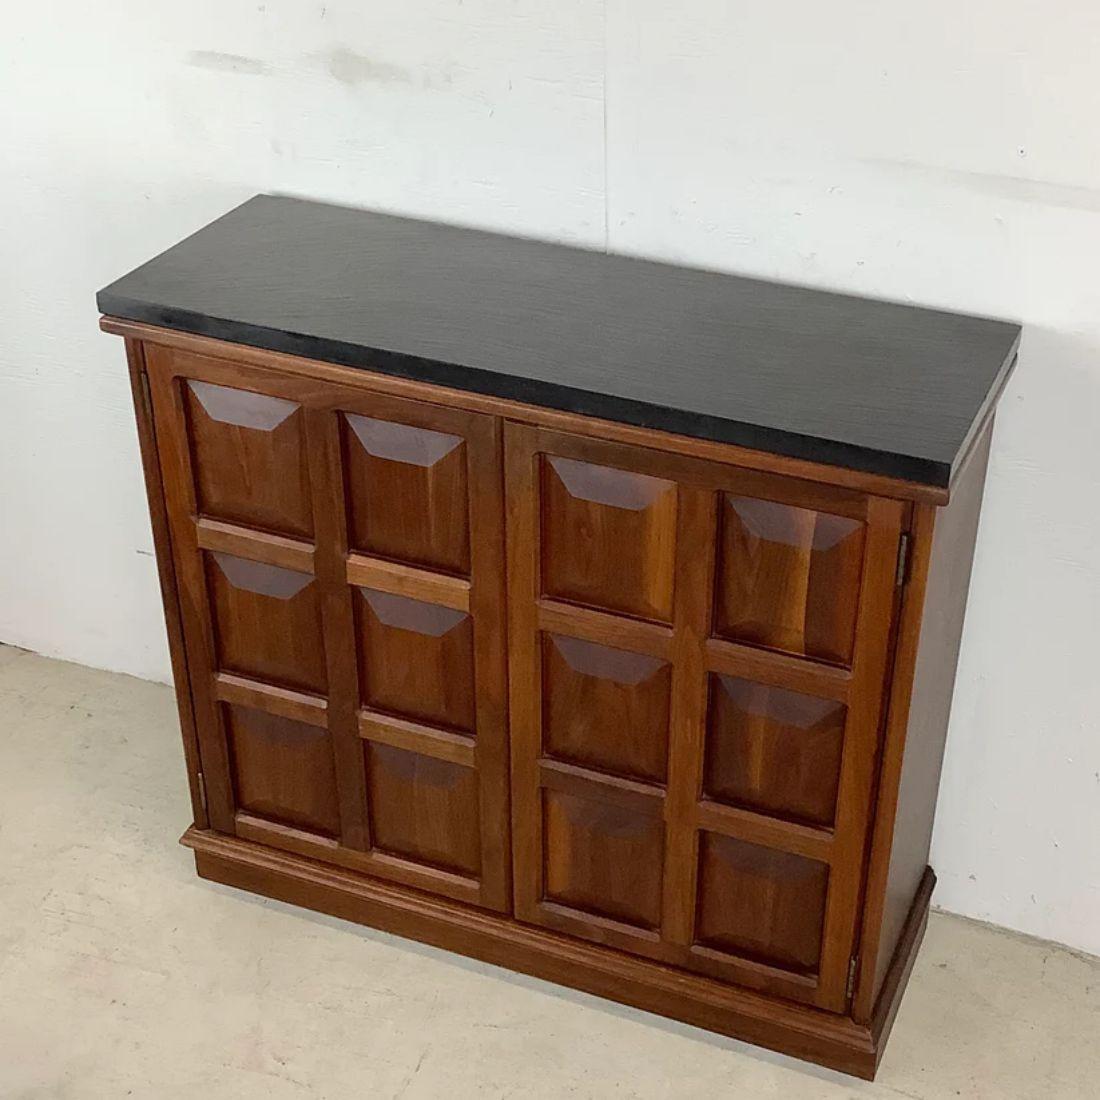 This uniquely narrow cabinet features sculpted door fronts and shelved interior in a beautiful vintage walnut finish- textured stone top adds a brutalist quality to this mid-century cabinet while the narrow footprint makes it a versatile storage